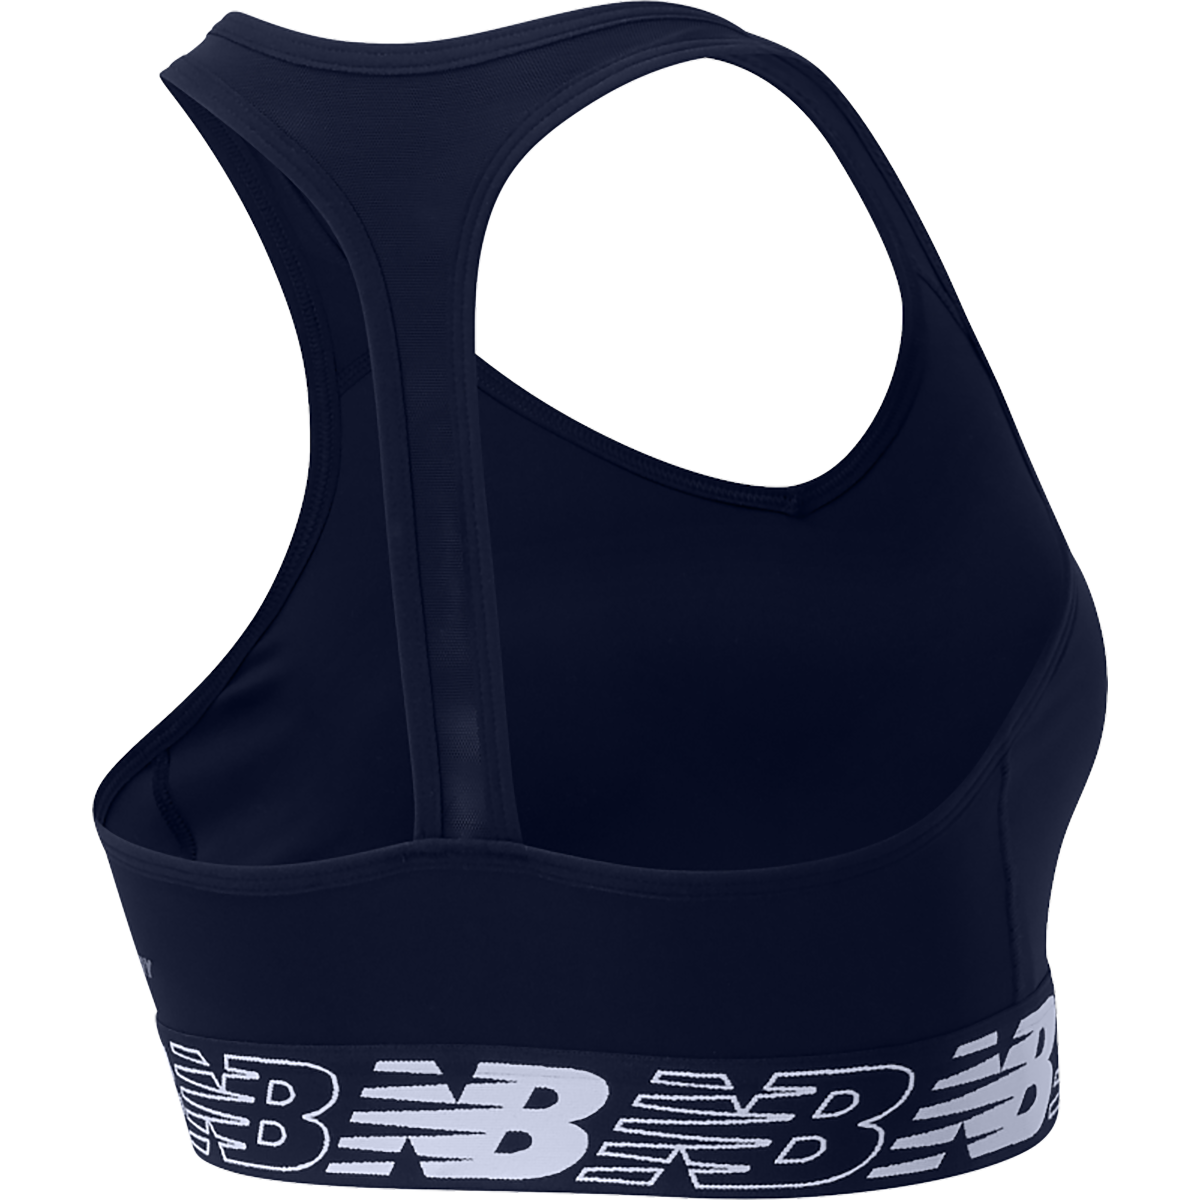 New Balance Pace Bra 3.0, , large image number null